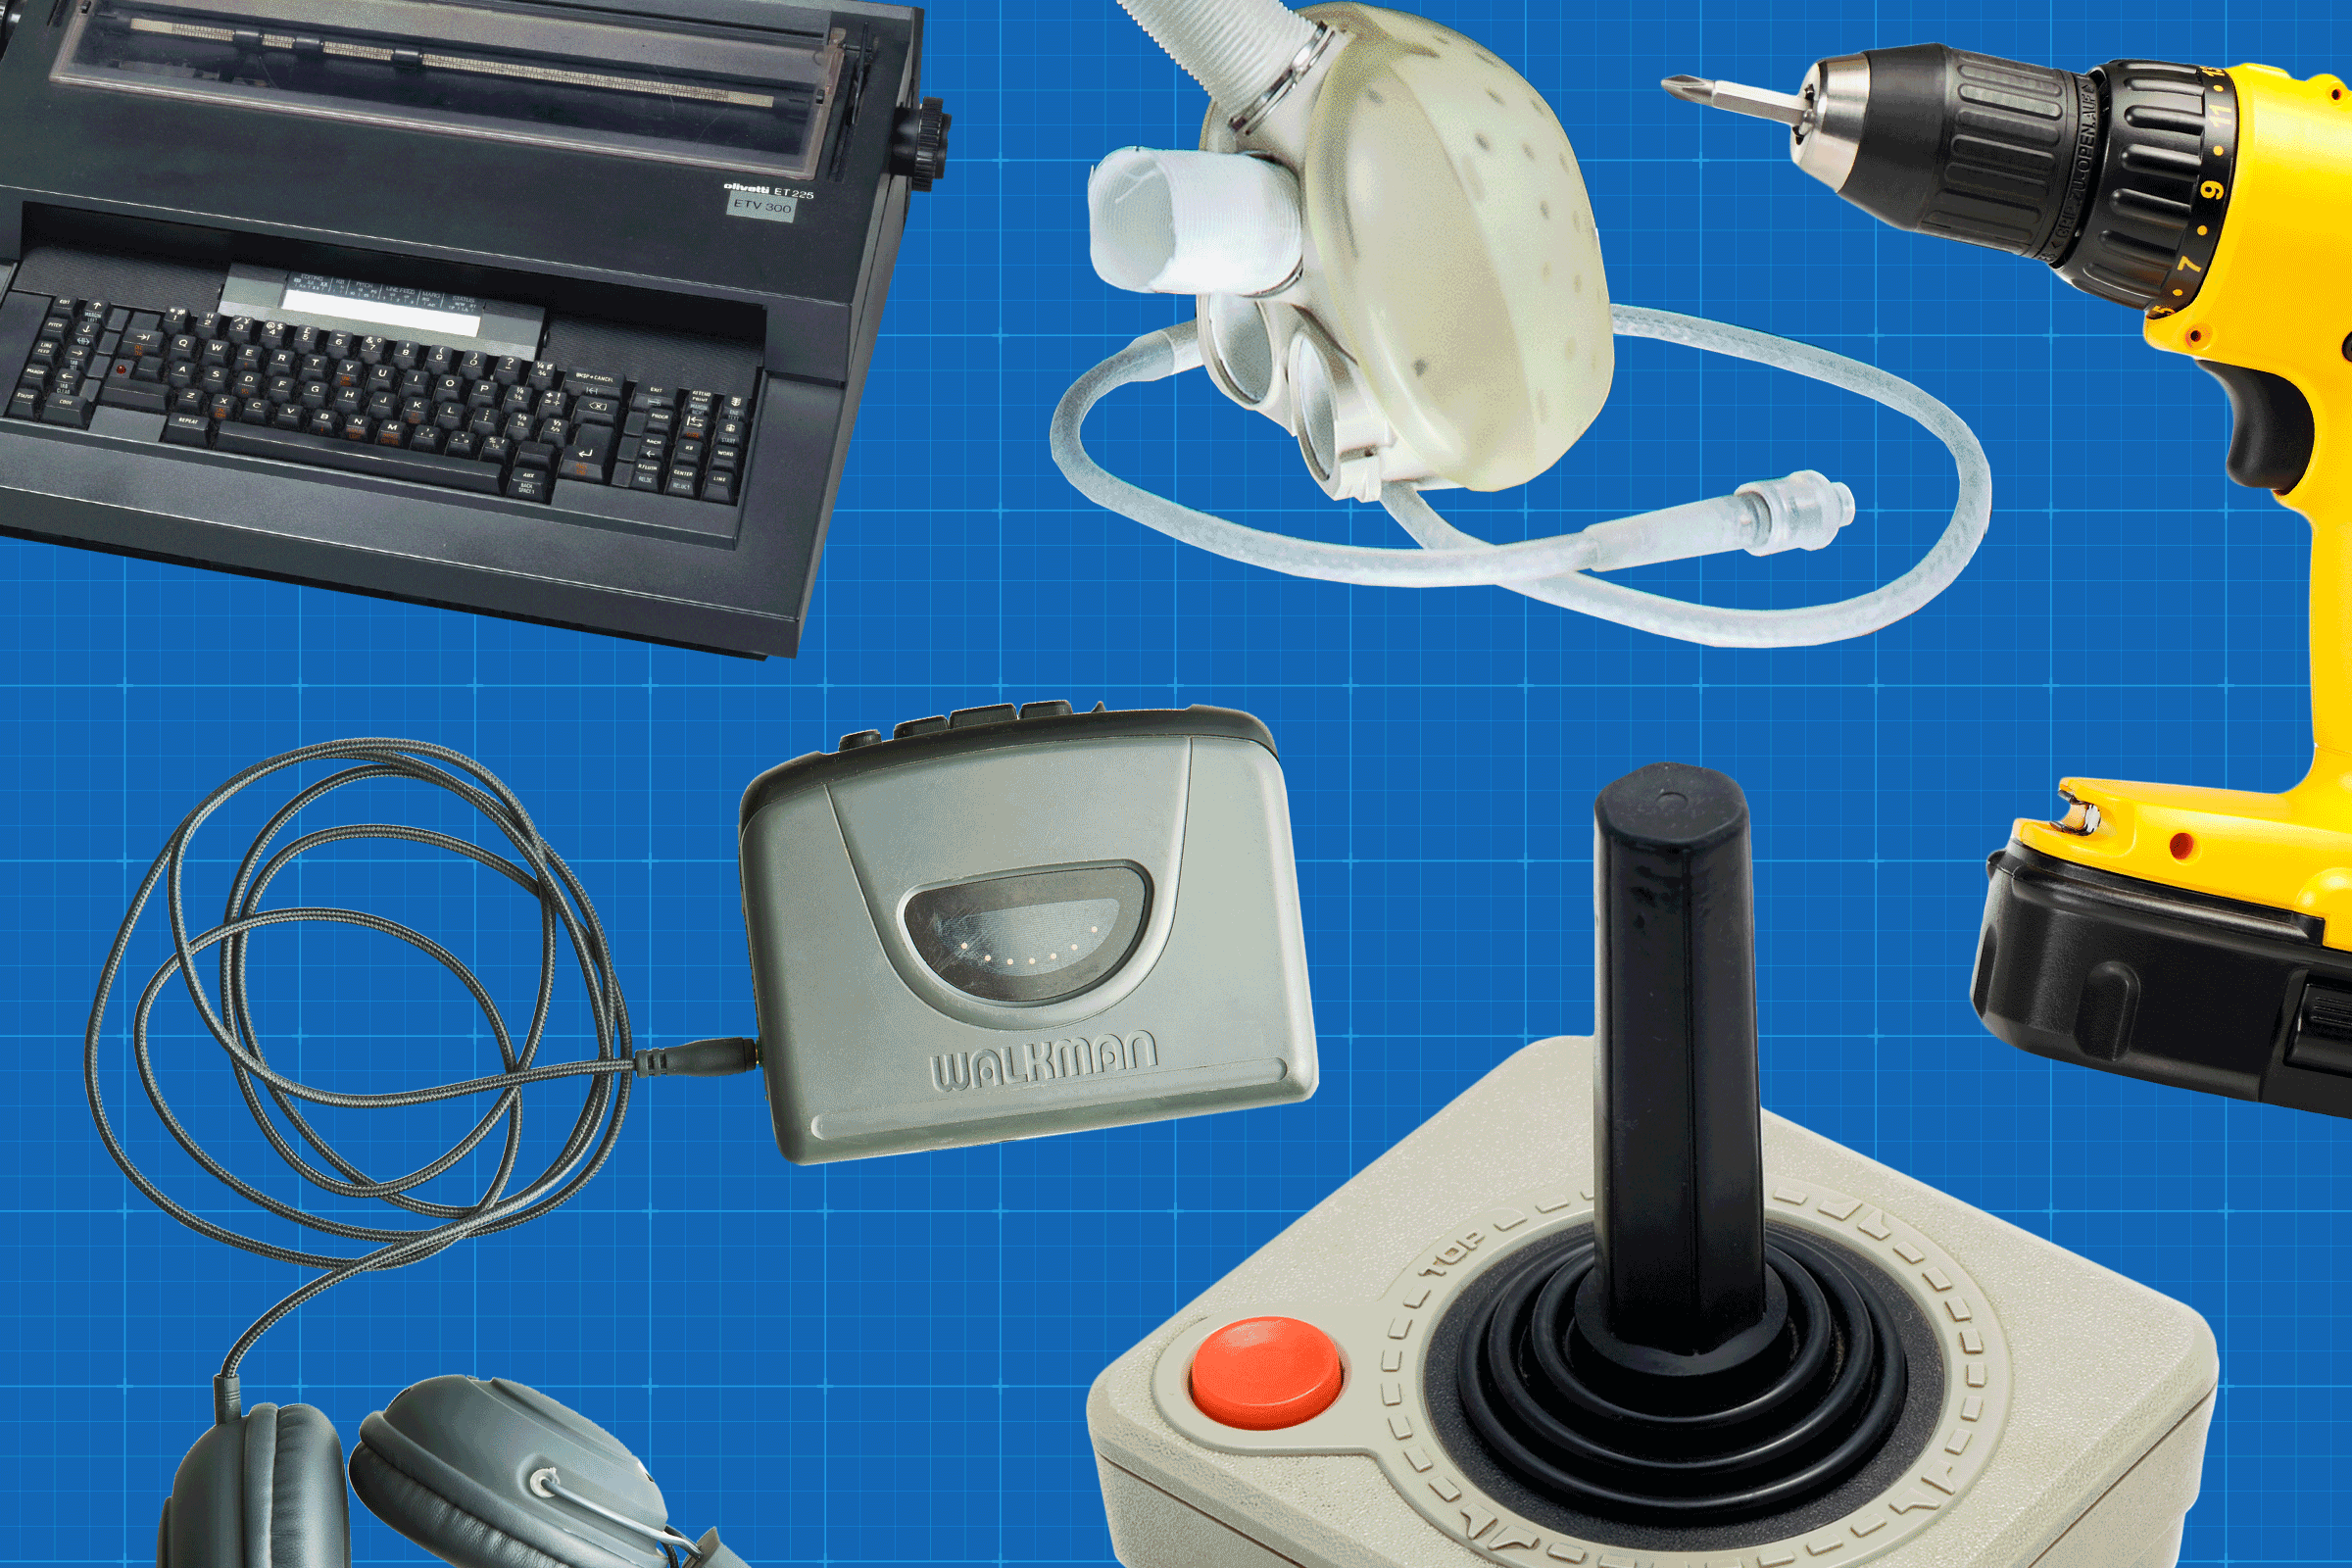 Inventions from 1960 to 2000